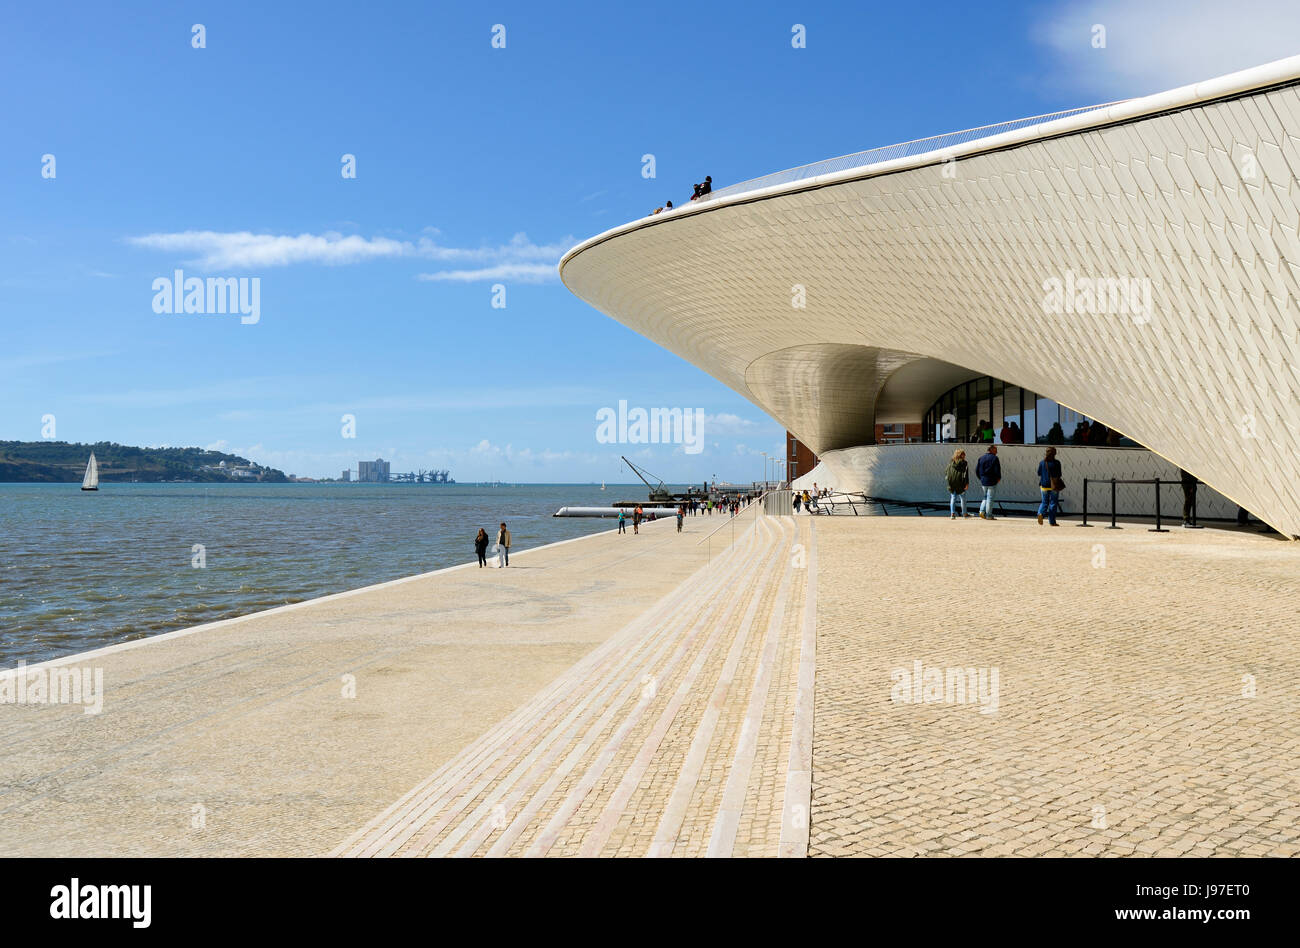 The MAAT (Museum of Art, Architecture and Technology), bordering the Tagus river, was designed by British architect Amanda Levete. Lisbon, Portugal Stock Photo